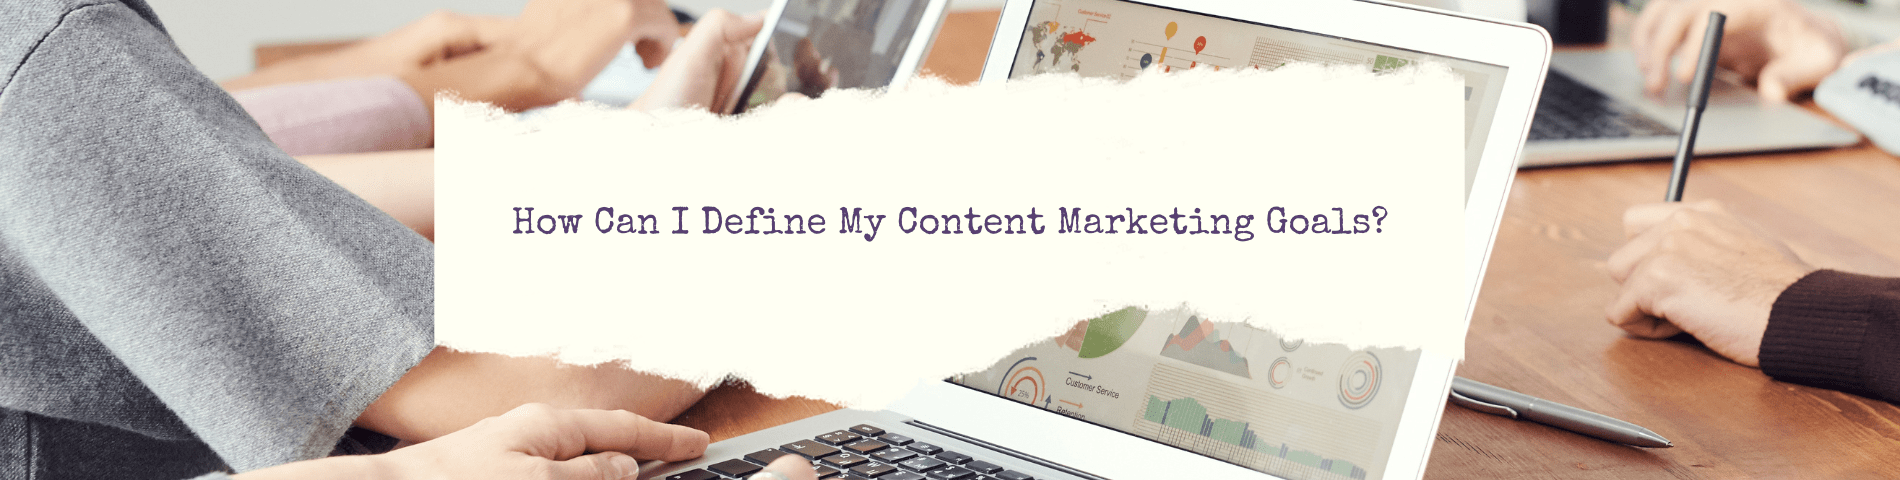 How Can I Define My Content Marketing Goals | Linguakey Blog